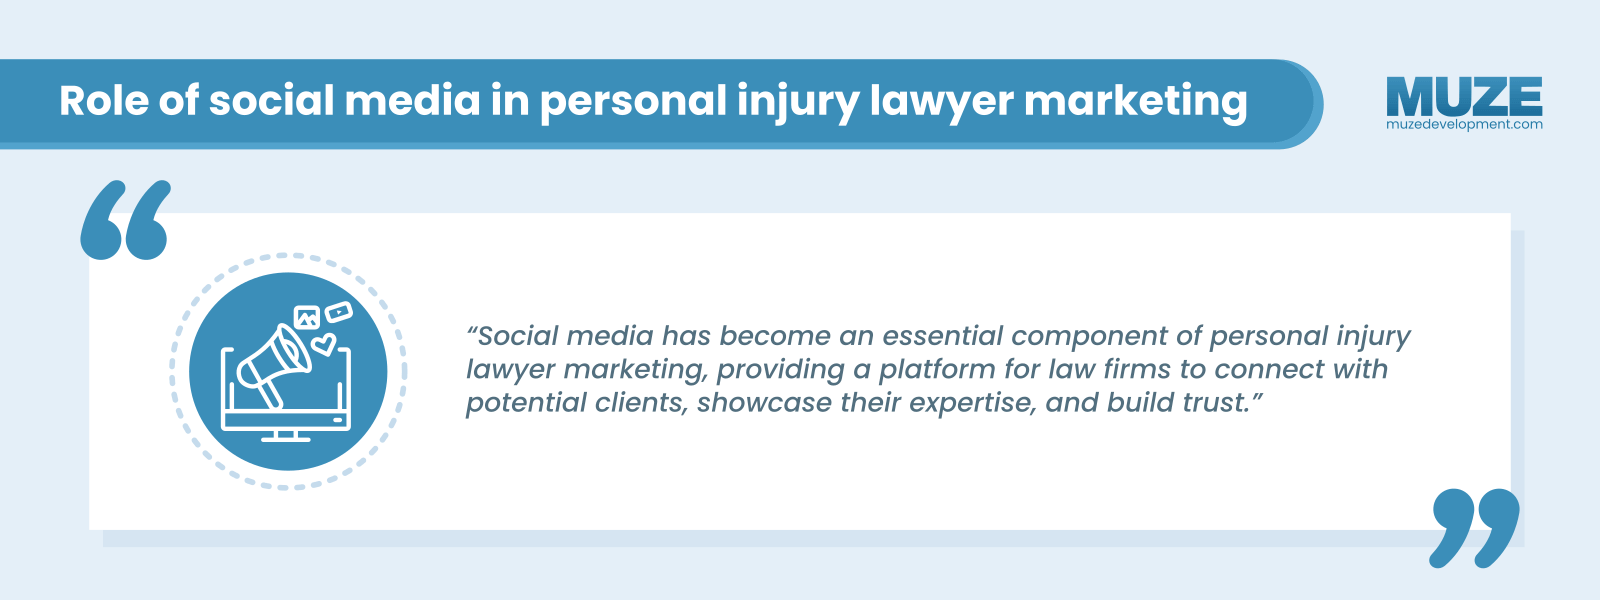 Role of social media in personal injury lawyer marketing